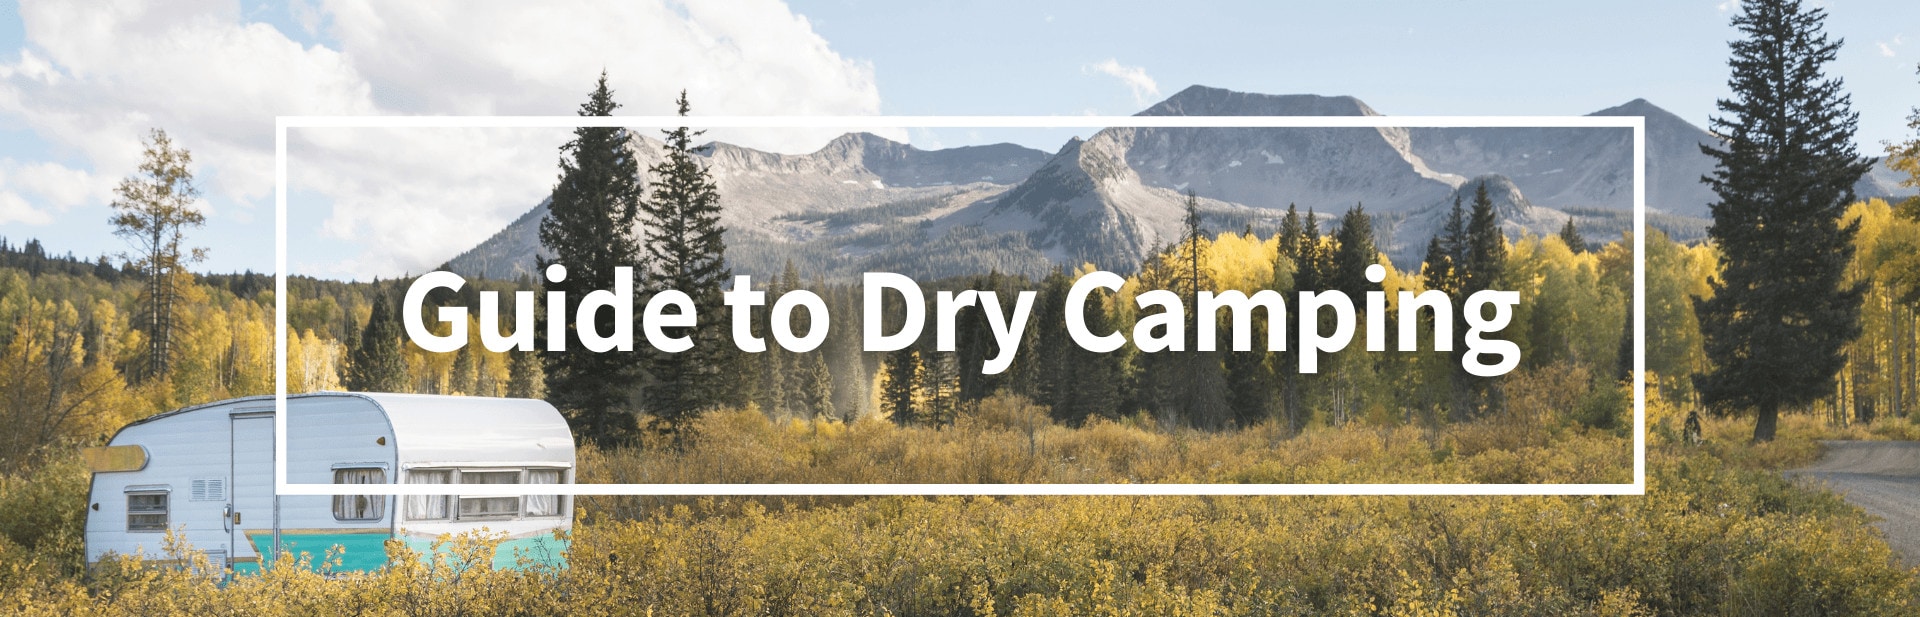 What Does Dry Camping Mean?